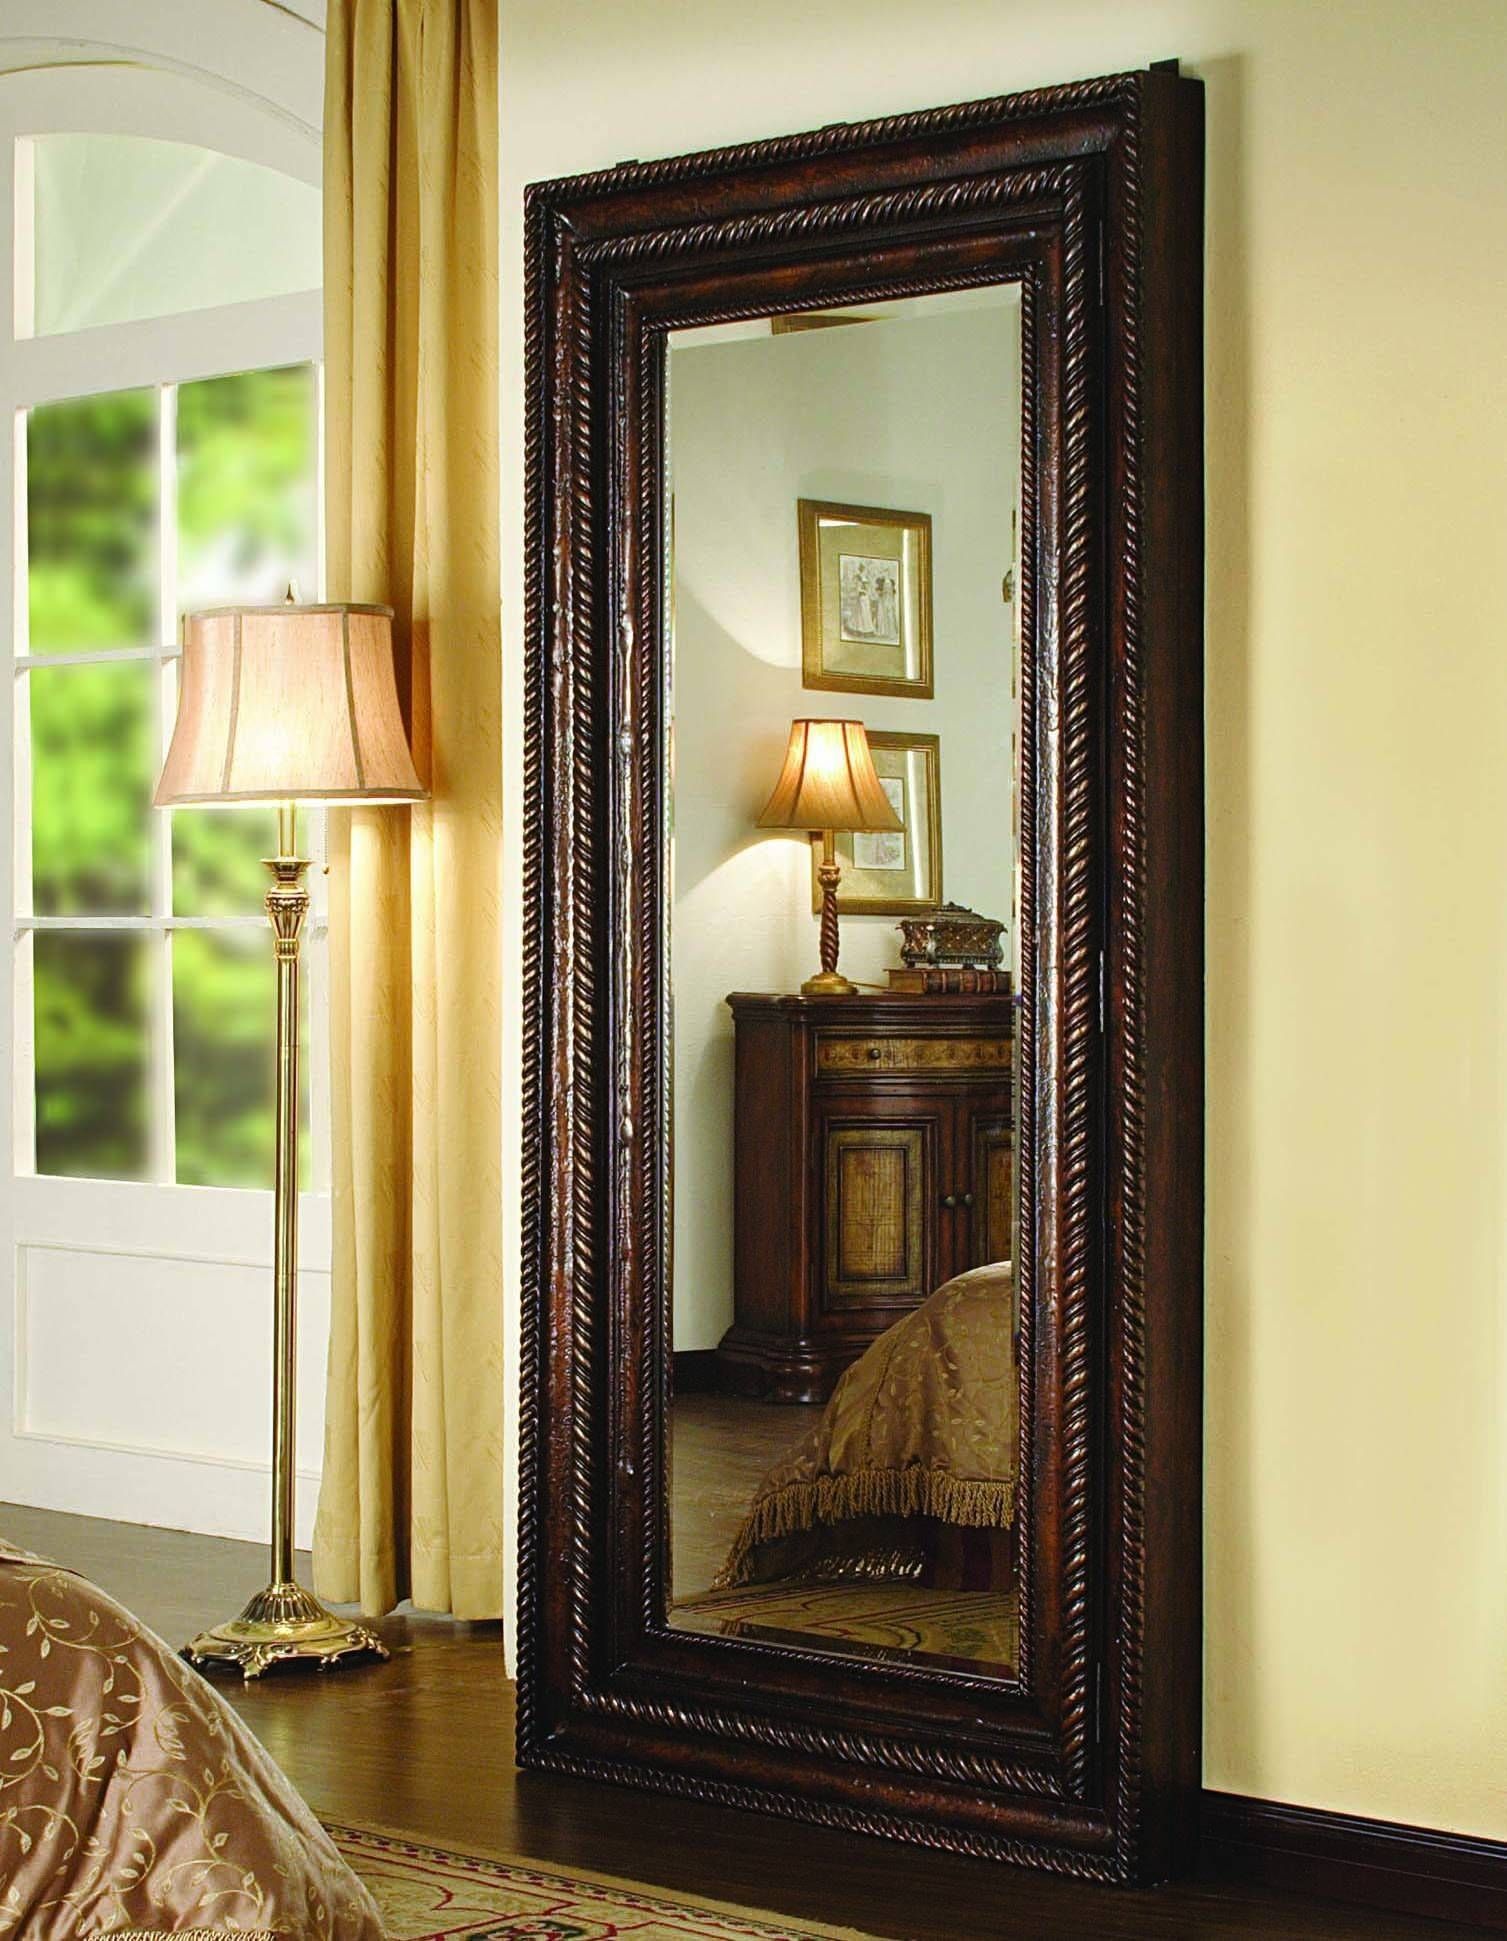 Mahogany Hidden Jewelry Storage Floor Mirror From Hooker | Coleman Throughout Hallas Wall Organizer Mirrors (View 11 of 15)